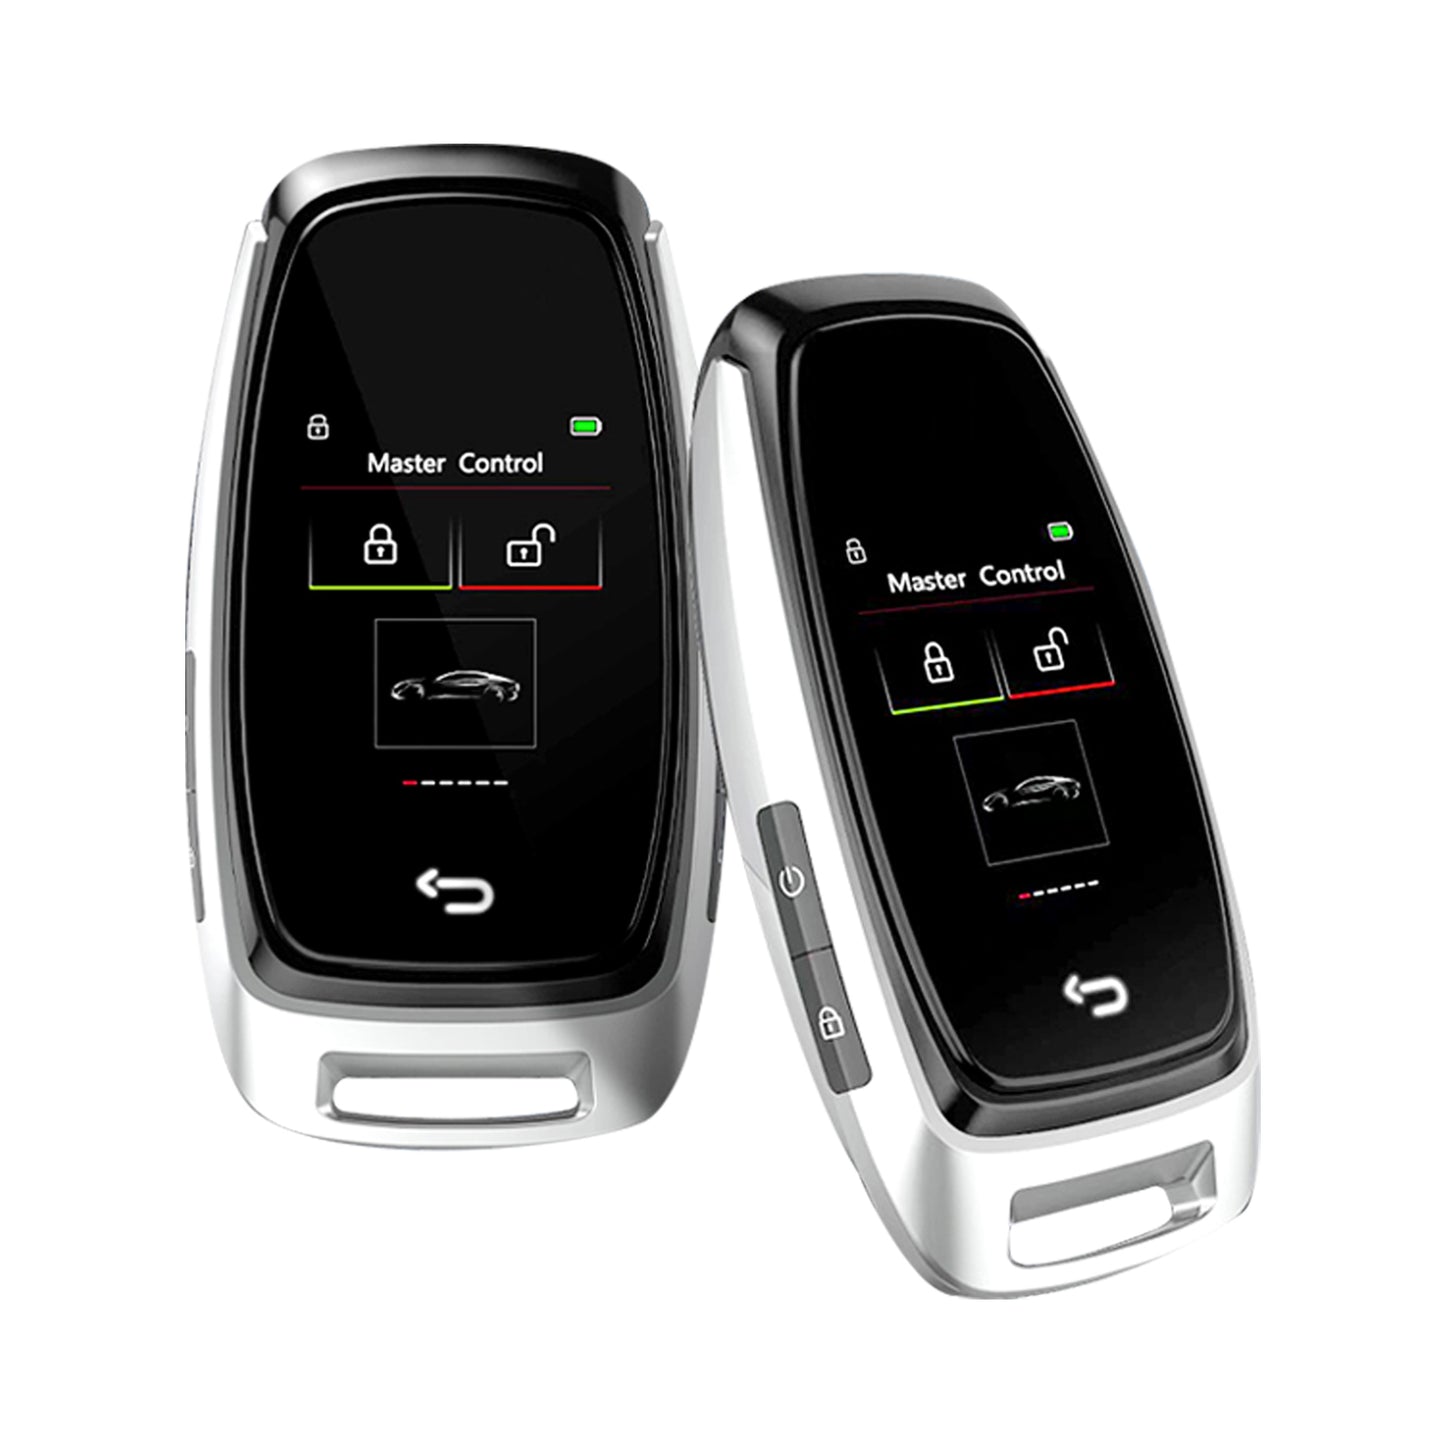 New Arrival CF920 Universal Keyless Entry System Car Touch Screen LCD Remote Control Key for Start Stop Cars